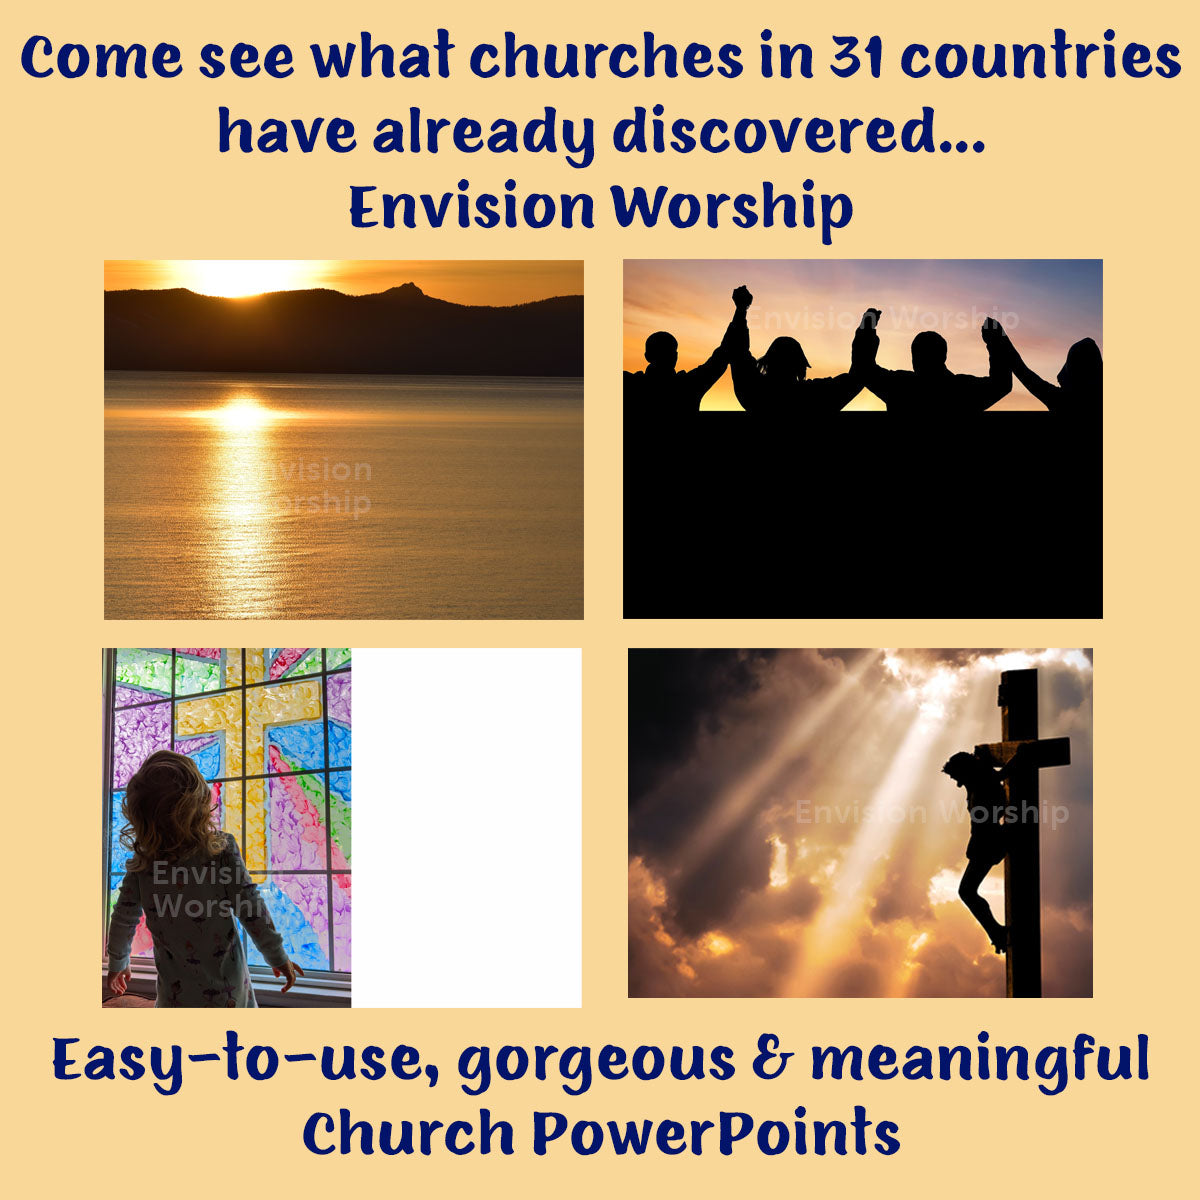 Church PowerPoint Presentation template slides for worship service